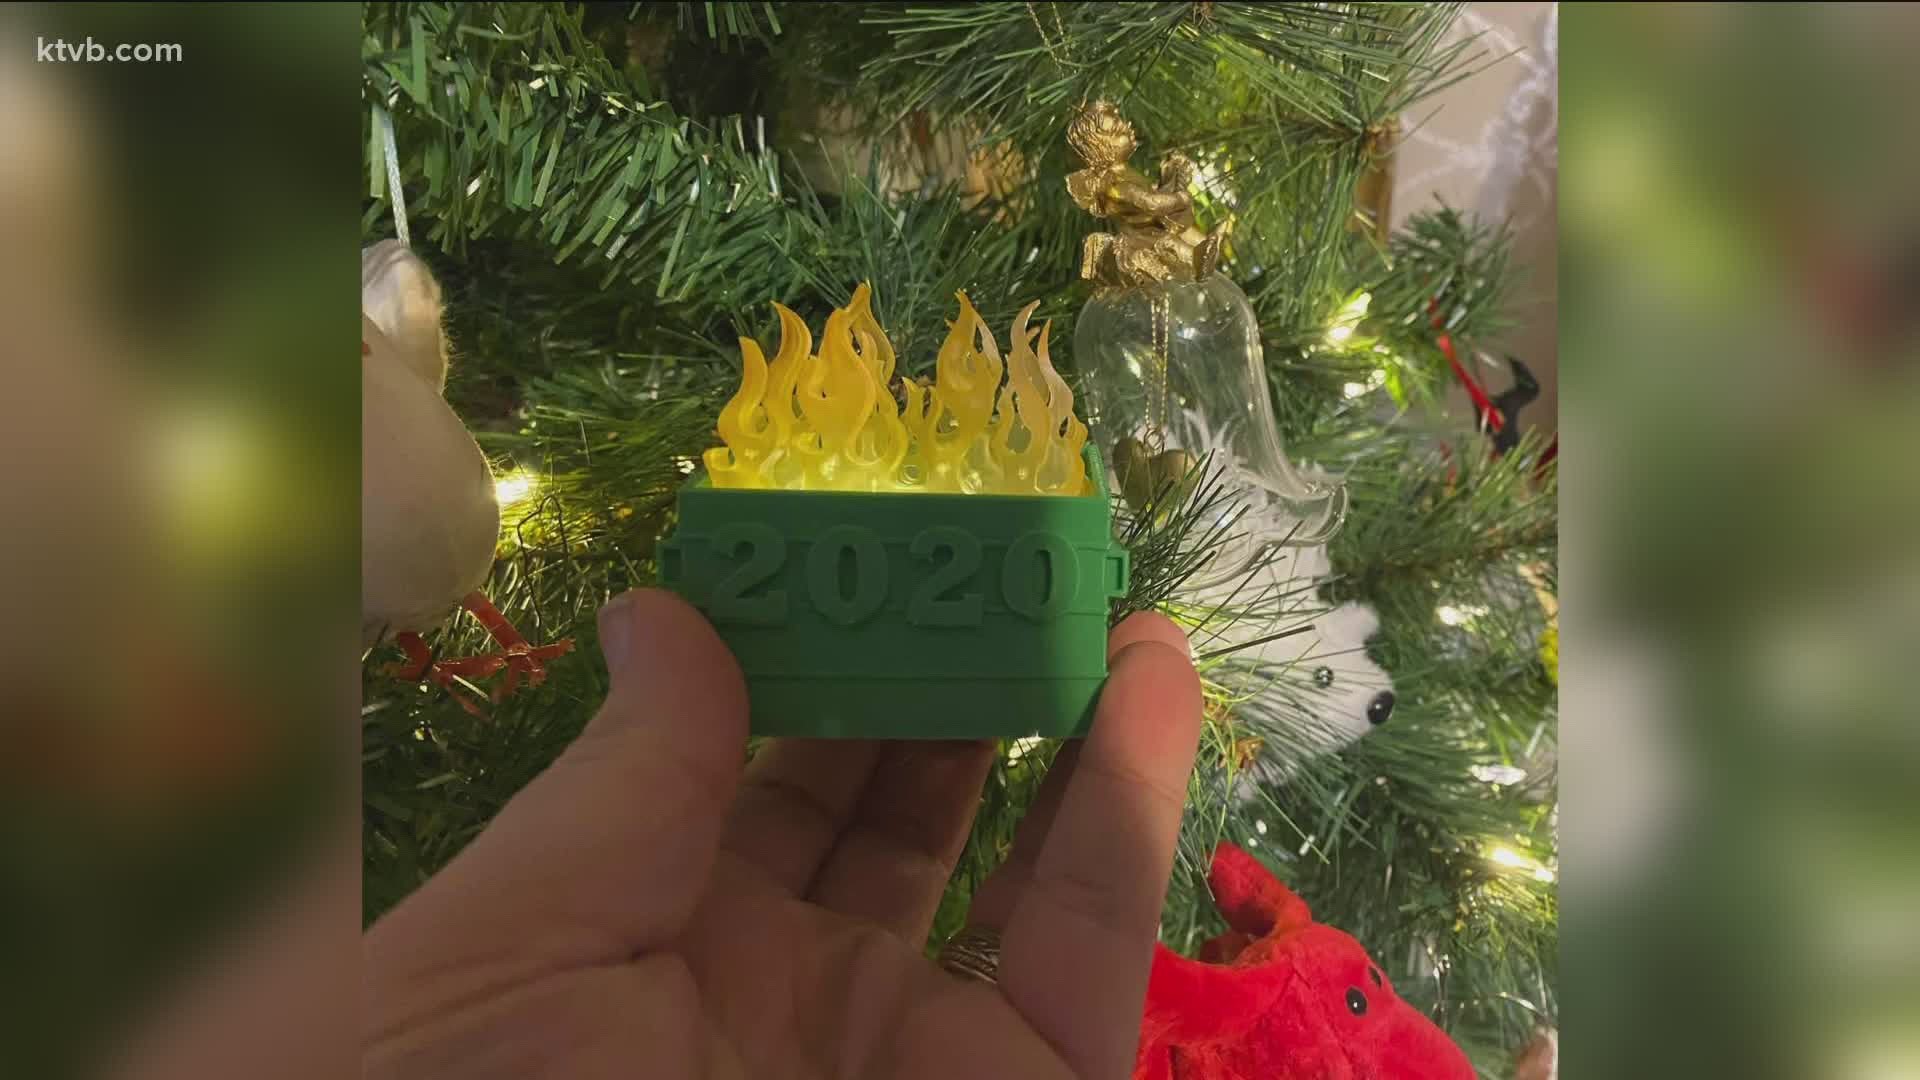 Plus, a local man created a fitting Christmas tree ornament for this year.